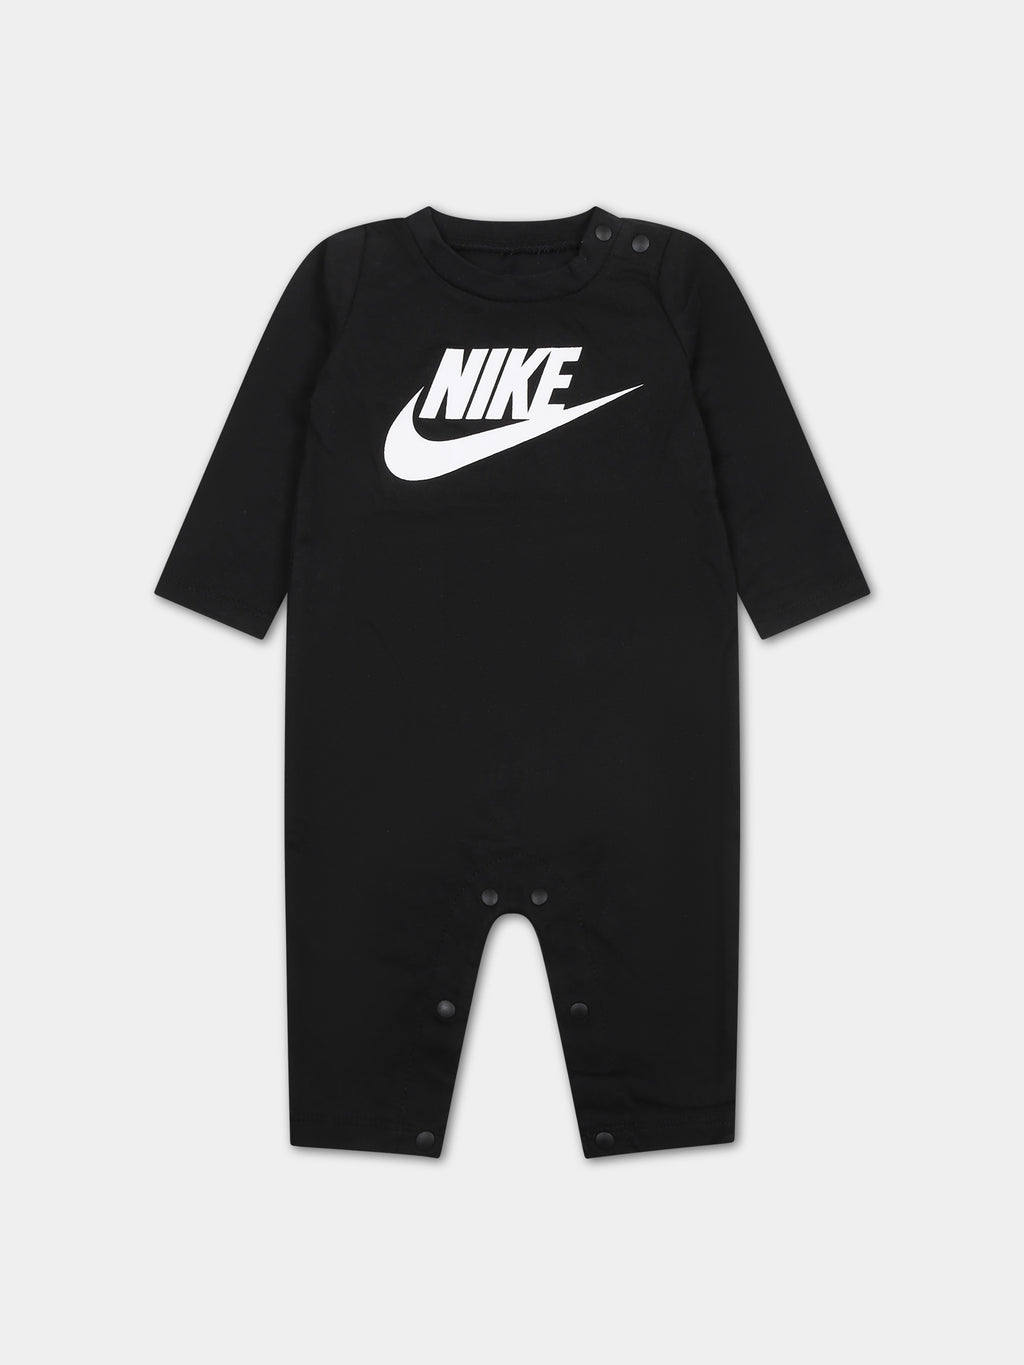 Black babygrow for baby boy with swoosh